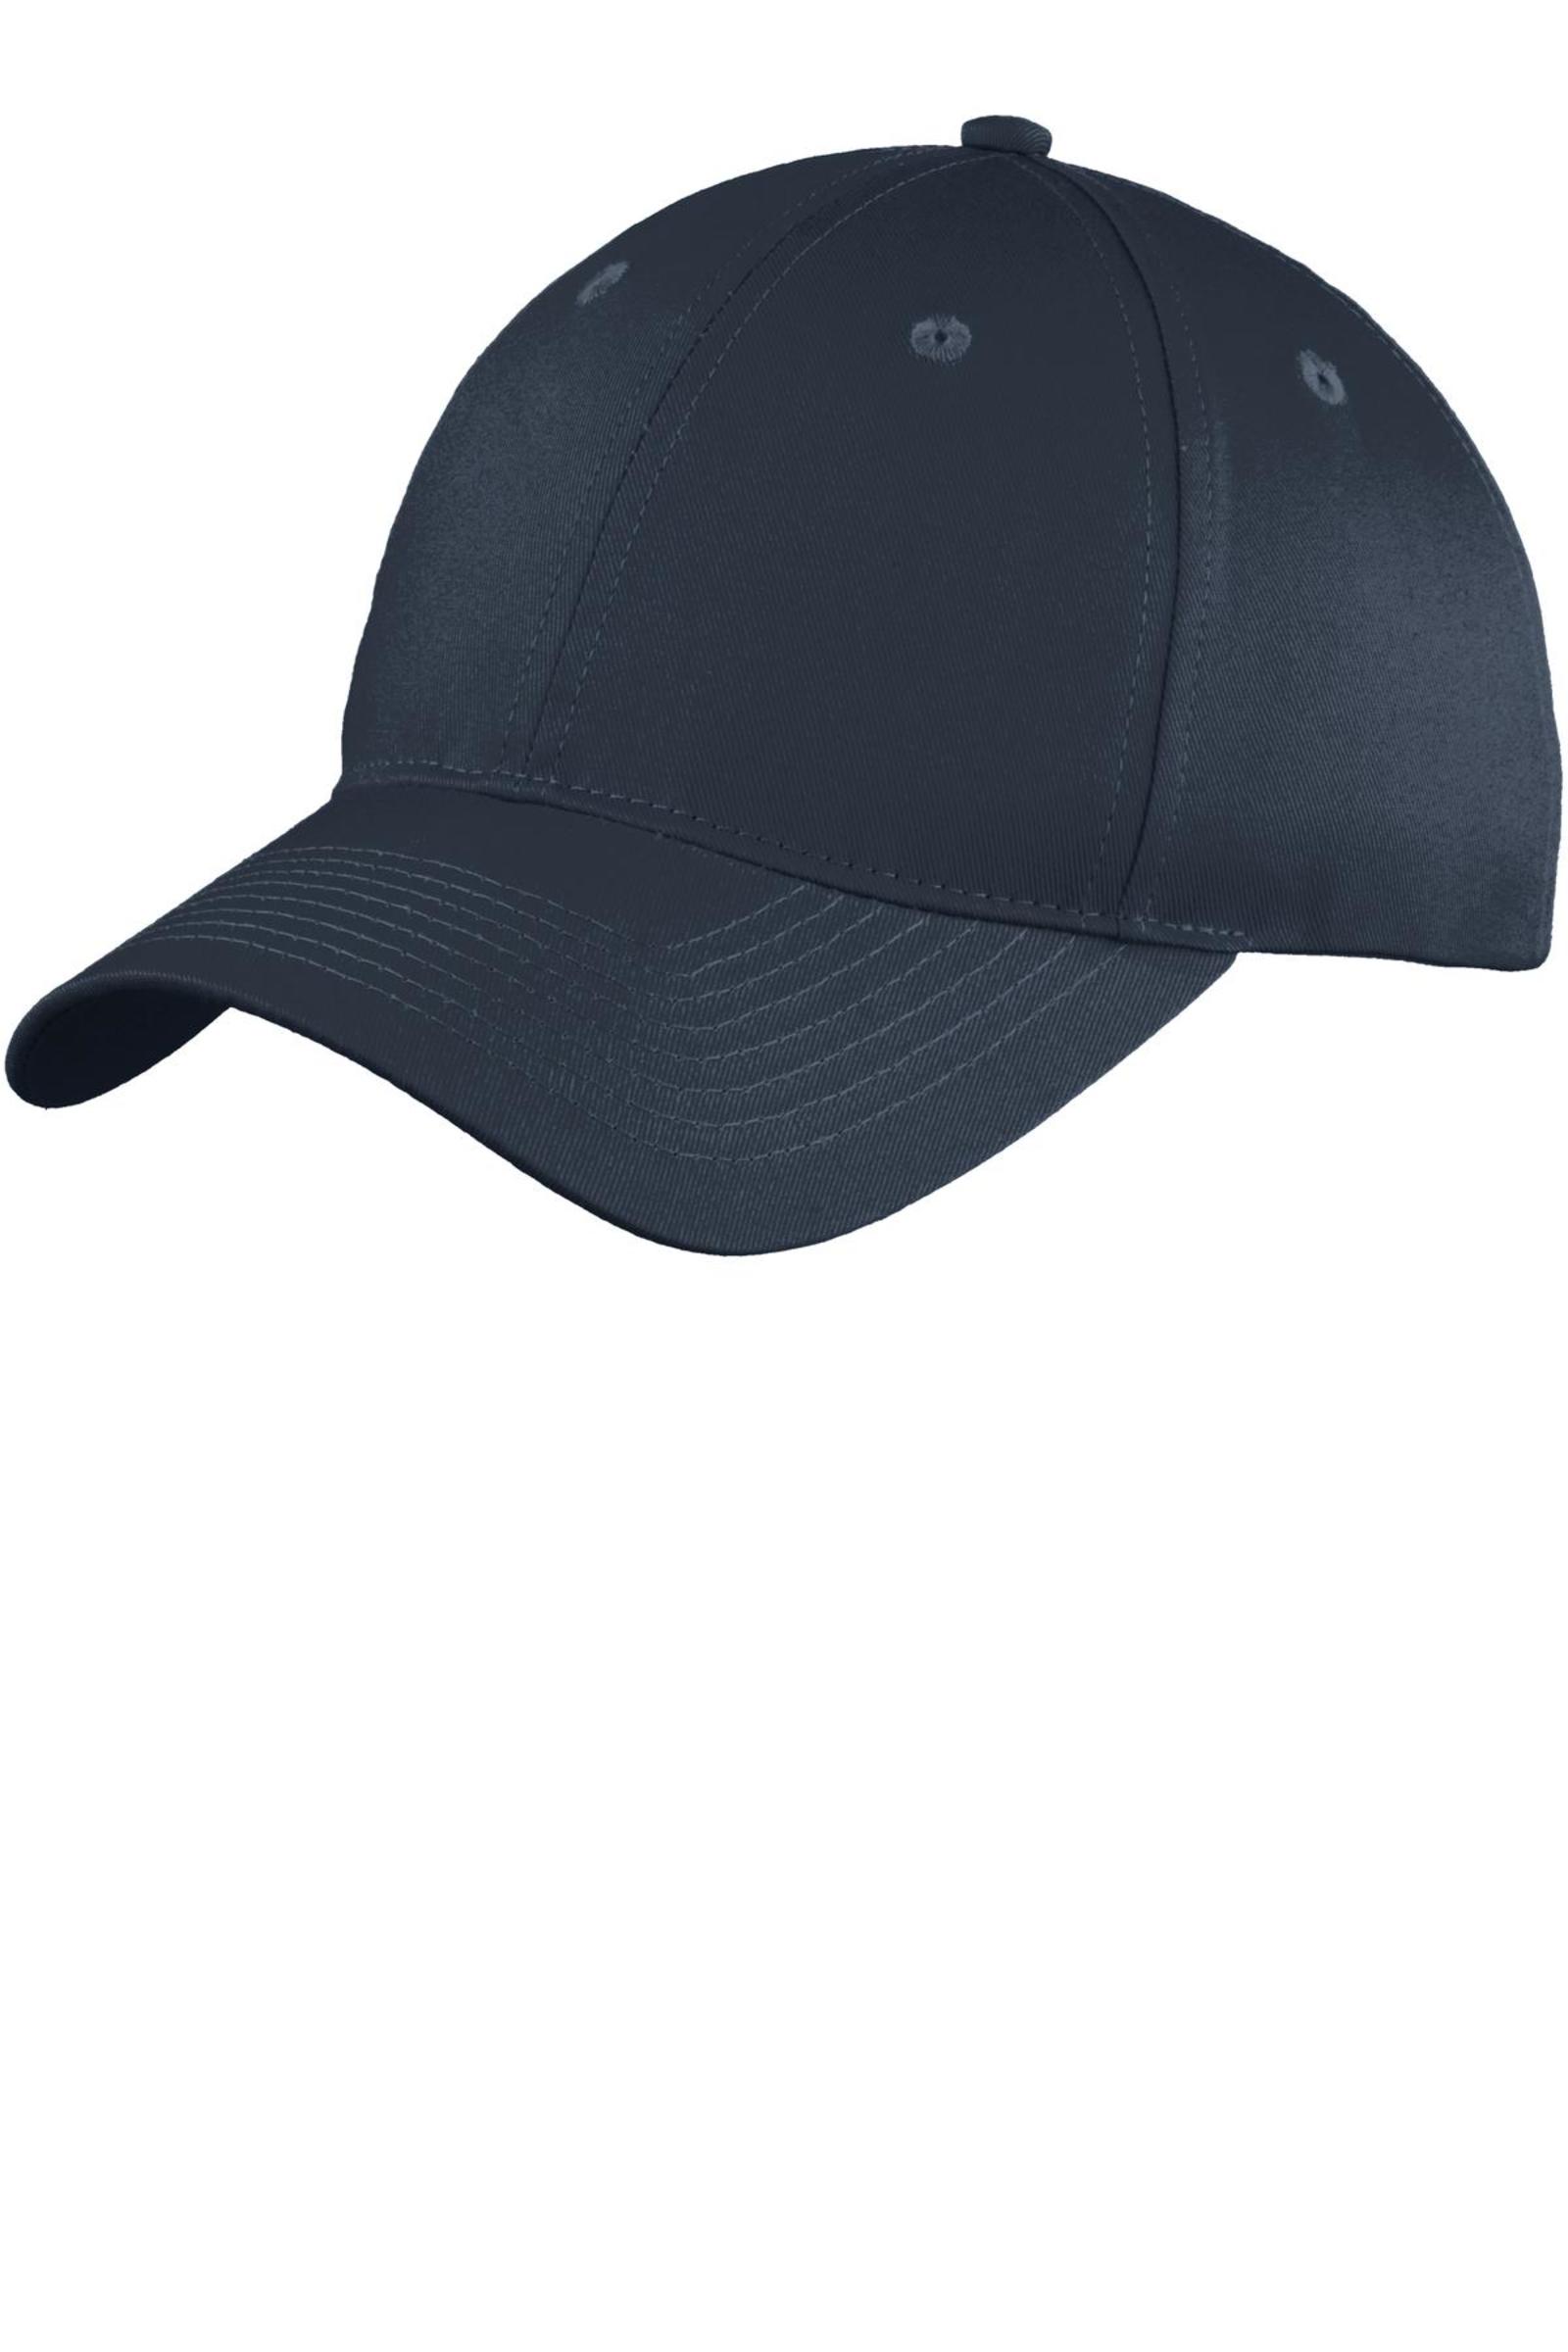 Product Image - Six-Panel Unstructured Twill Cap, dad hat, dad cap, unstructured, hat, six panel